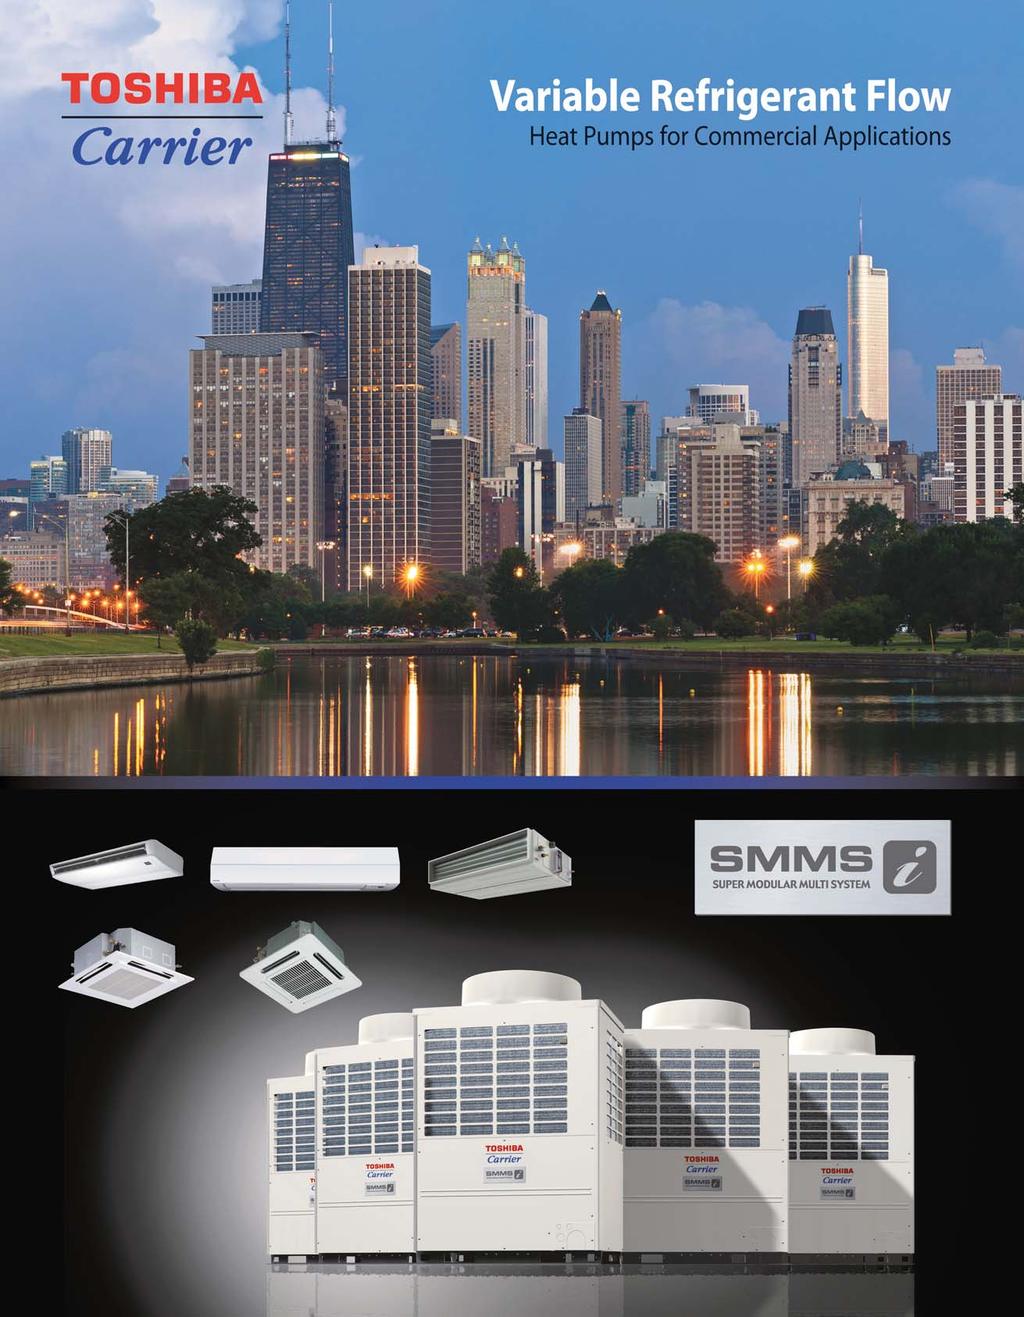 Toshiba-Carrier offers both ductless and ducted comfort solutions for all applications: residential, light commercial and larger commercial buildings.